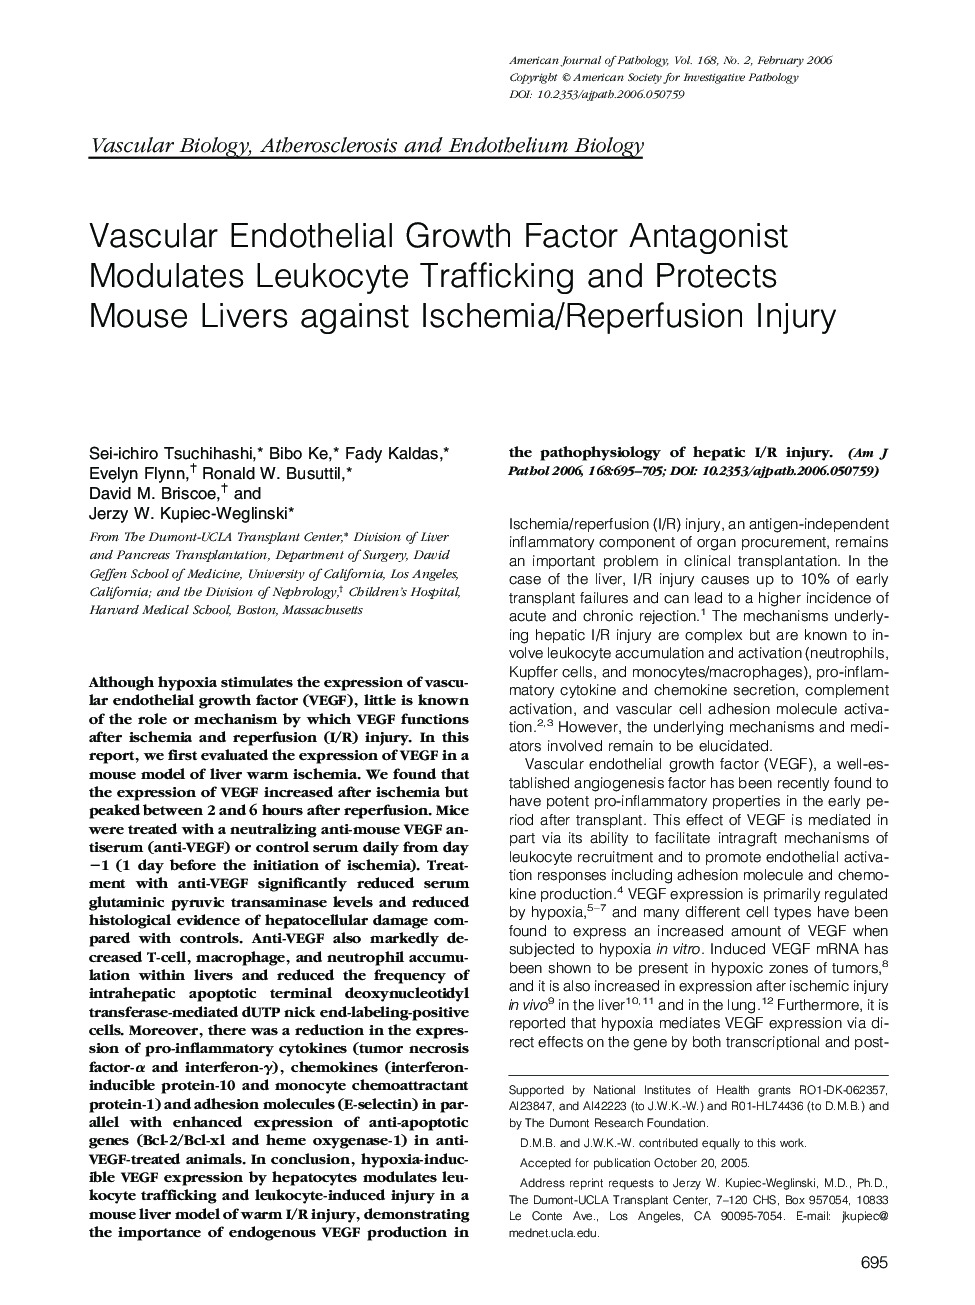 Regular ArticlesVascular Endothelial Growth Factor Antagonist Modulates Leukocyte Trafficking and Protects Mouse Livers against Ischemia/Reperfusion Injury